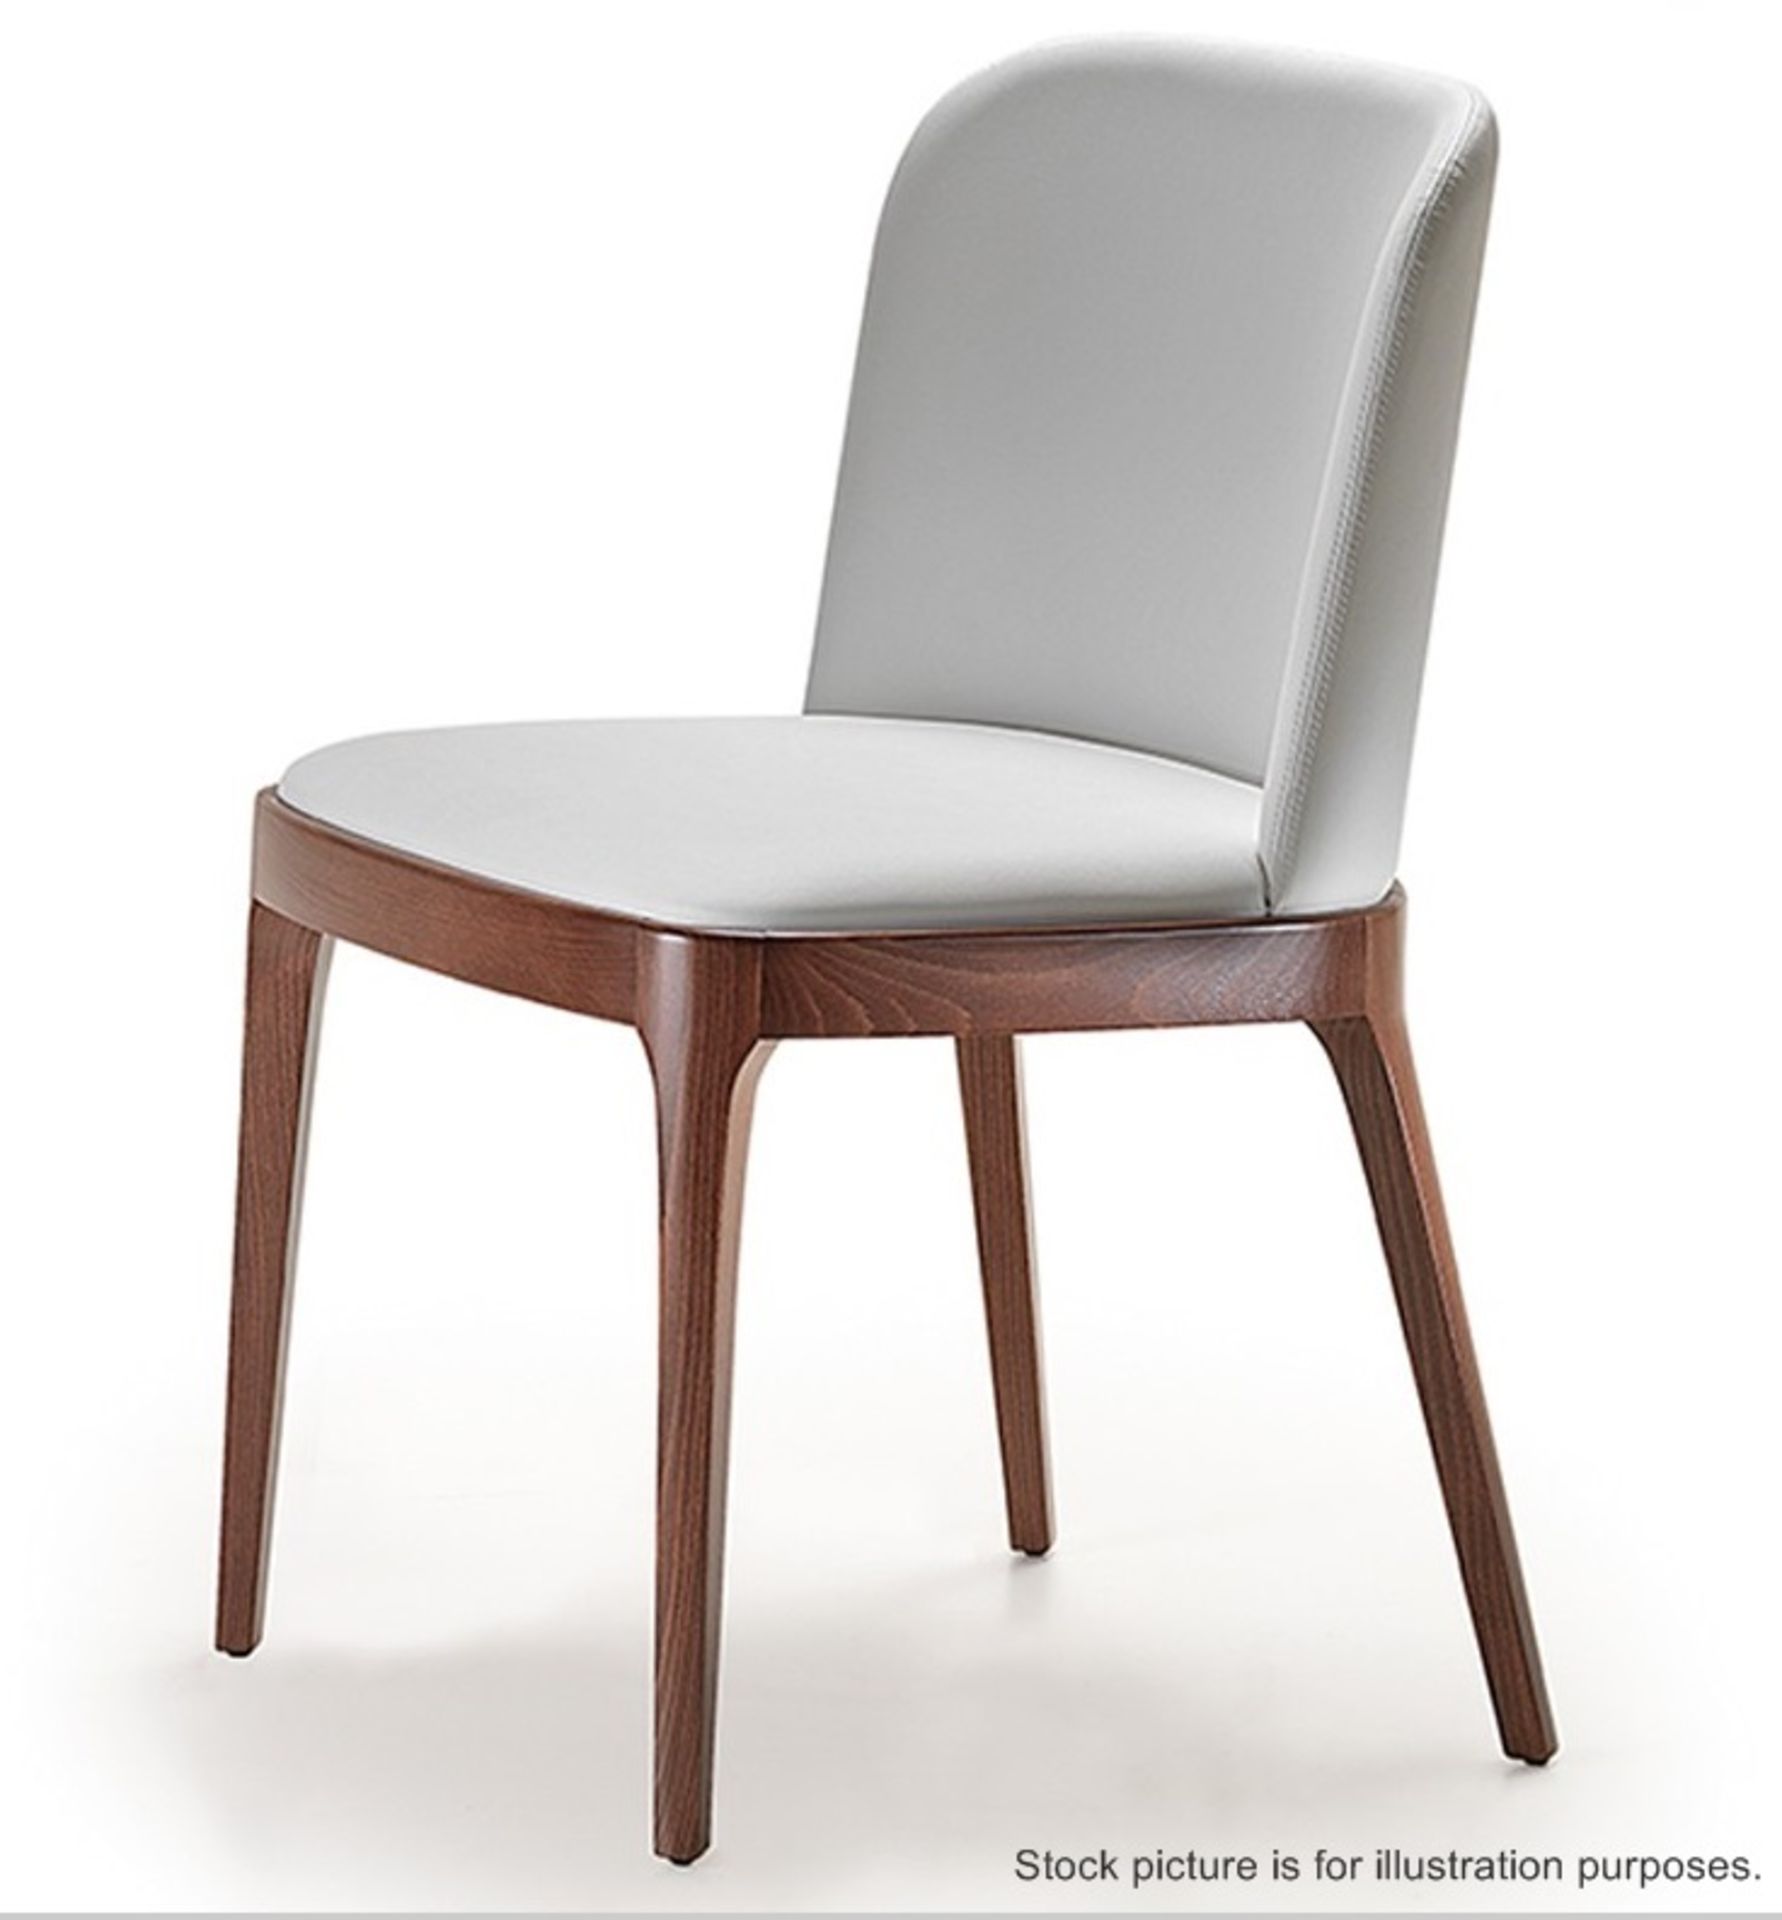 4 x Matching CATTELAN "Magda" Leather & Oak Chairs - Dimensions: w:53 d:55 h:81cm (seat height 48cm) - Image 5 of 7